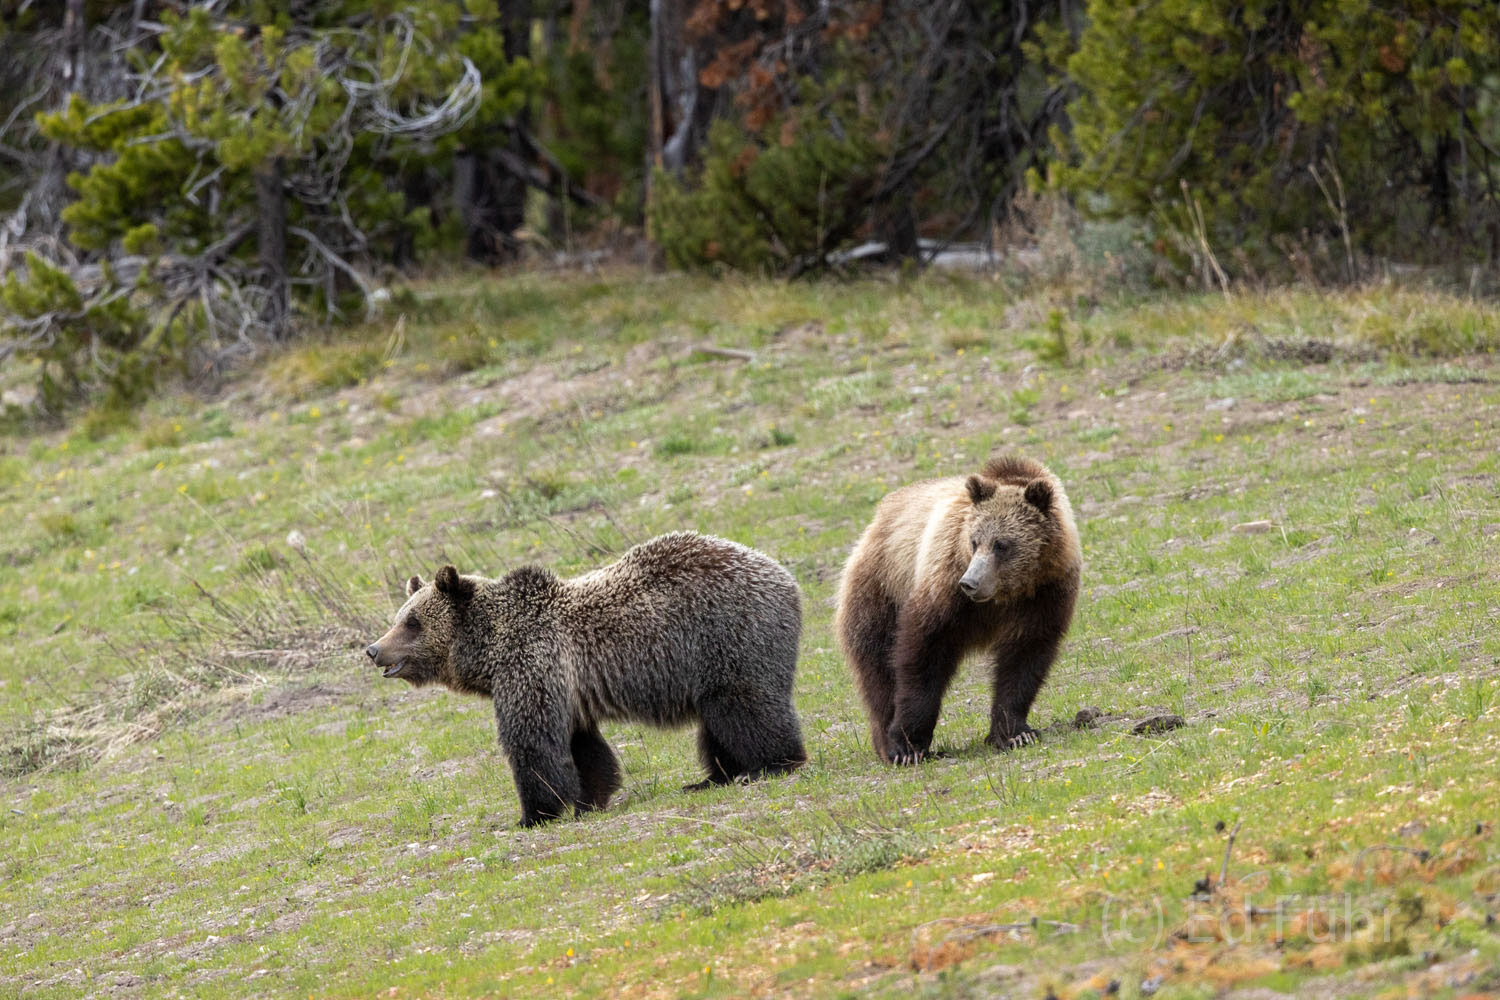 Two subadult grizzly bears, from different moms, find comfort in each other's presence as they learn the difficult ways of the...